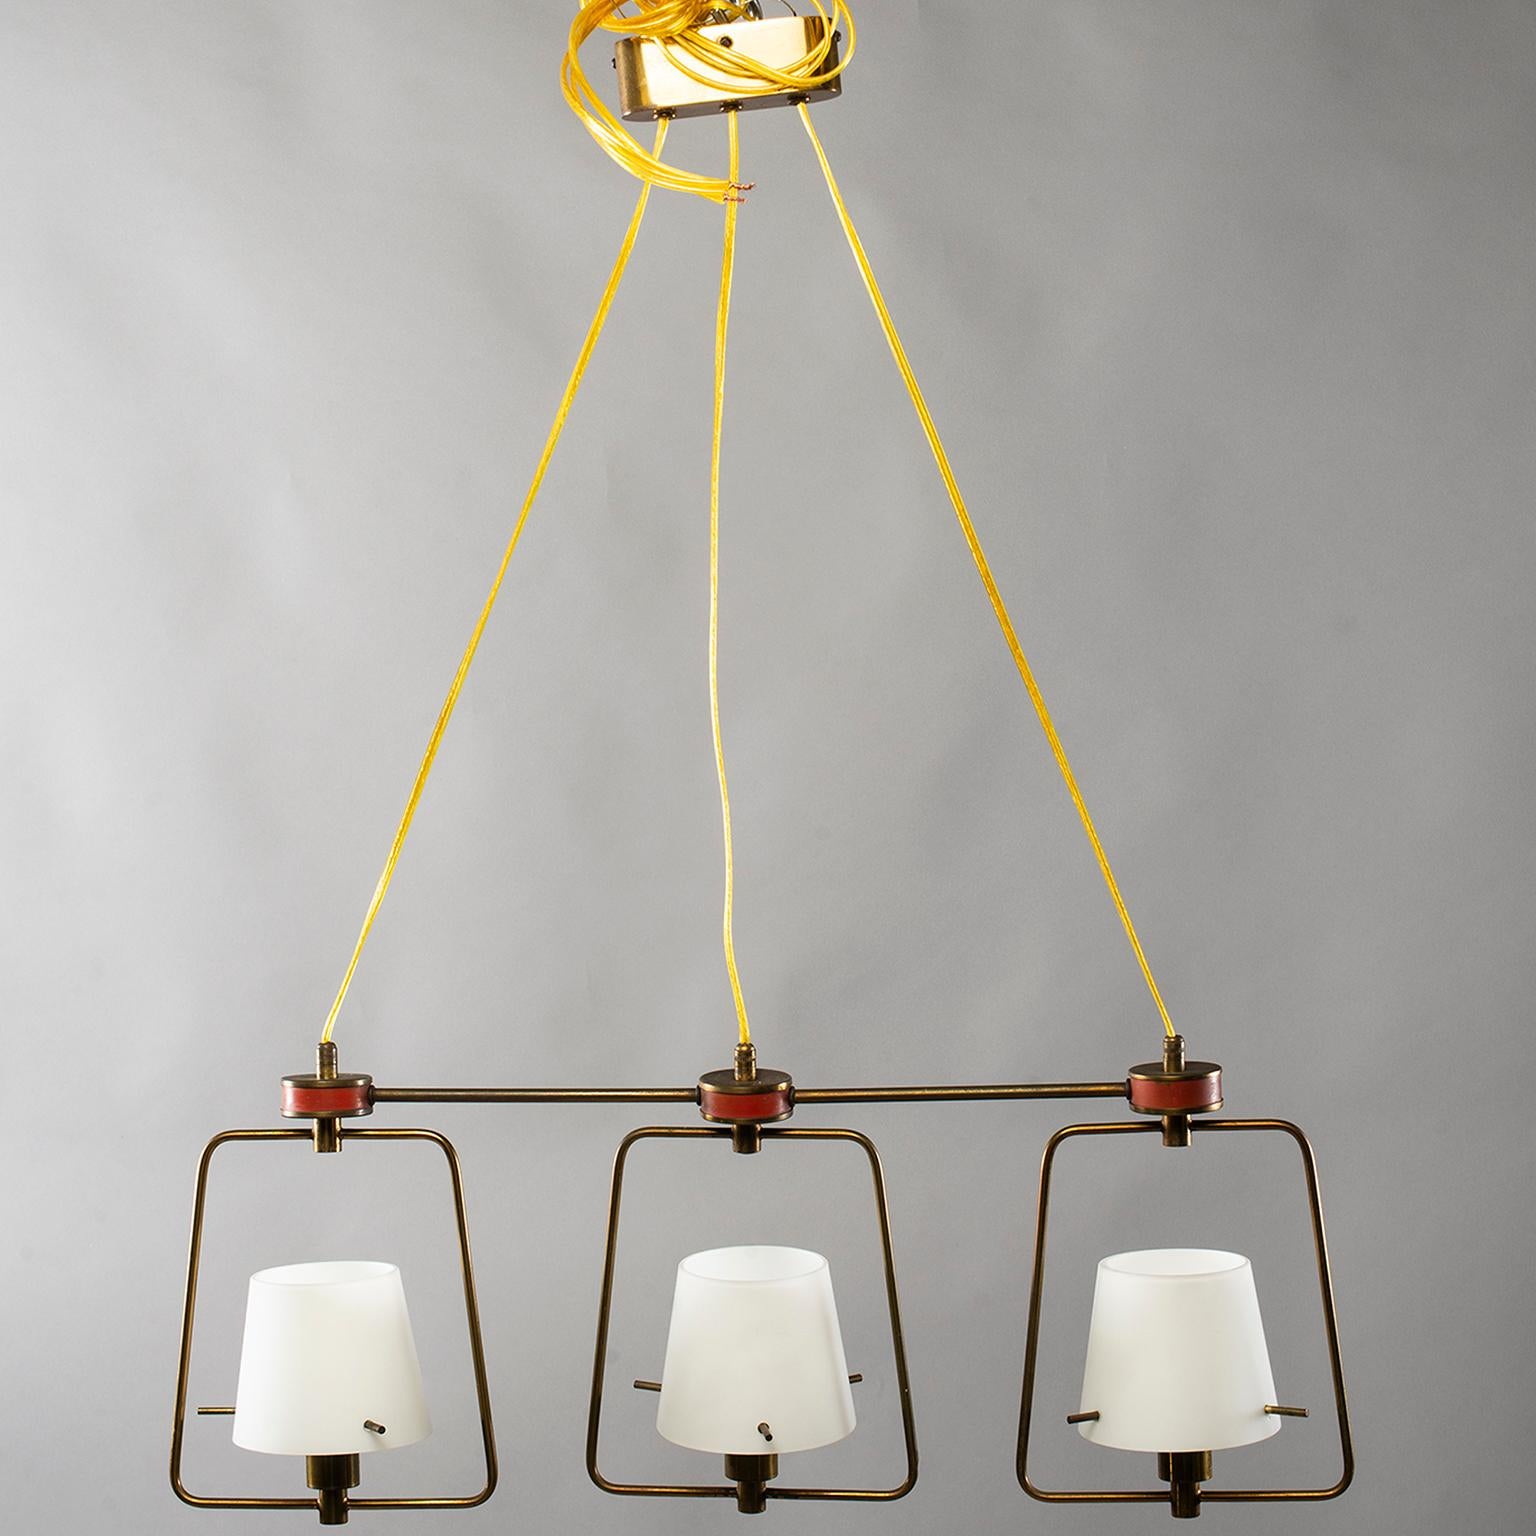 Stilnovo style Italian three light fixture, circa 1960. Brass tubing frame has red enamel accents and features adjustable length electrical cording and three glass shade lights with candelabra sockets. Glass shades are secured with brass pins.